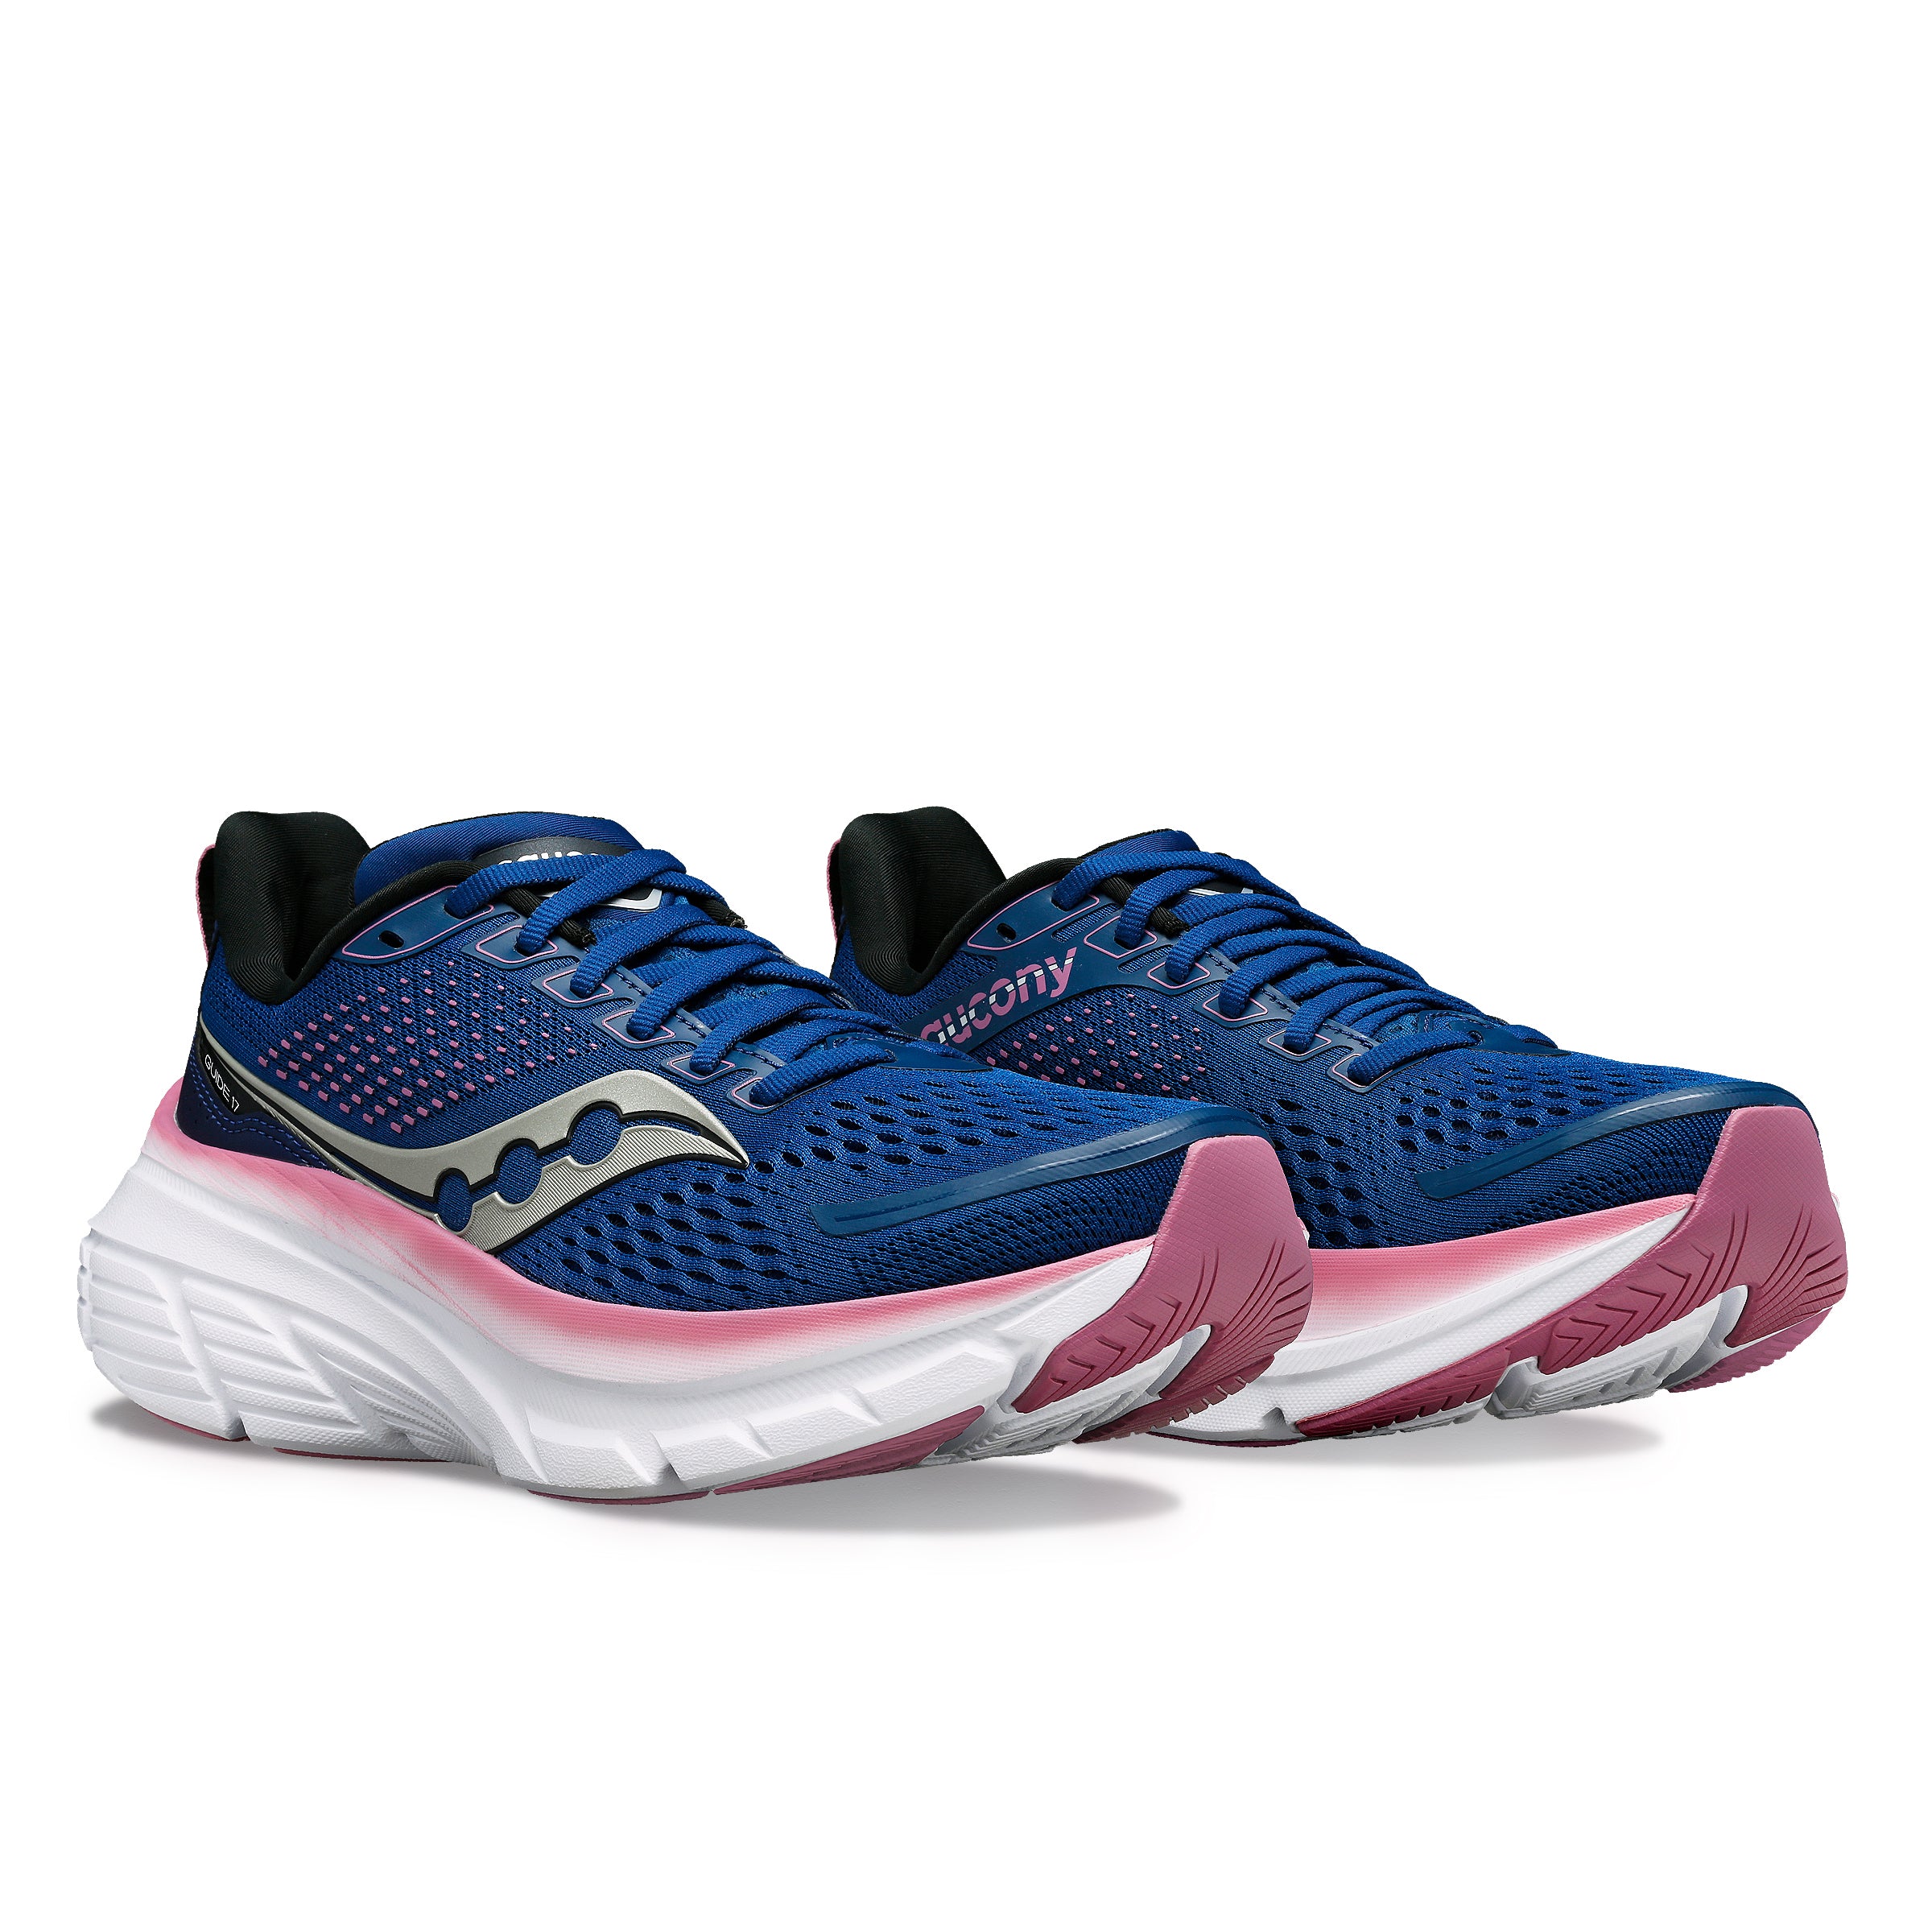 womens guide 17 wide d 106 navy orchid 